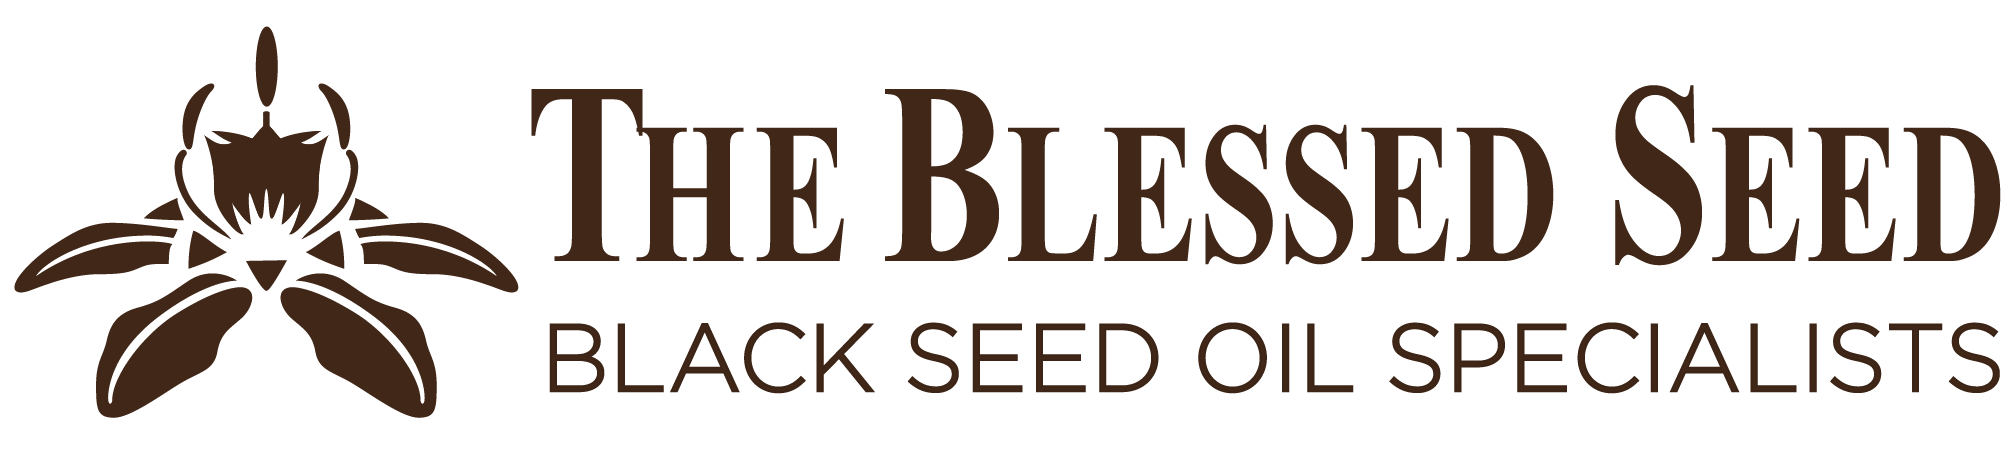 The Blessed Seed